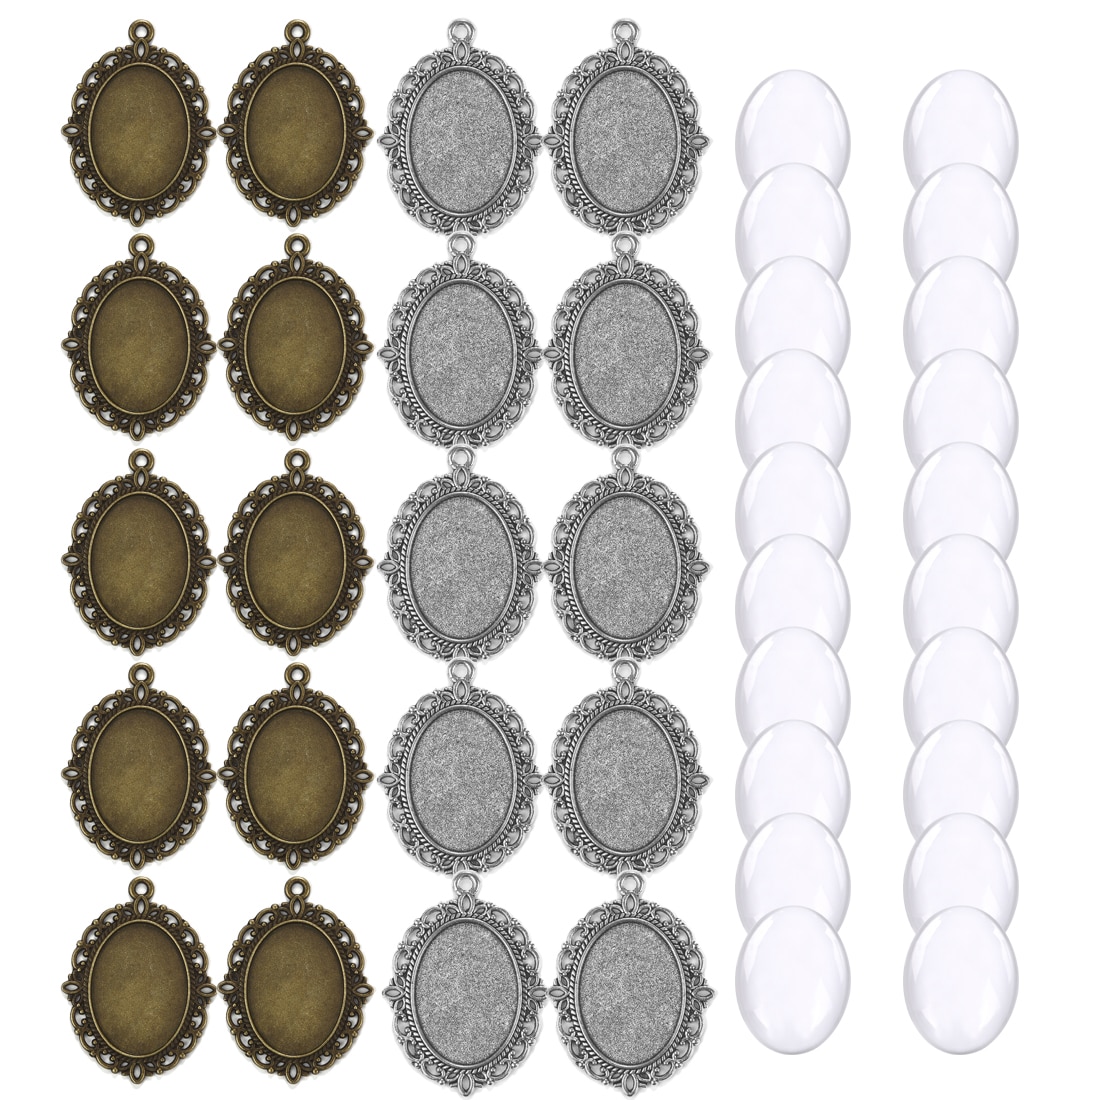 40pcs Oval Pendant Base Setting Glass Cabochons 18x25mm Cameo For DIY Jewelry Making Pendants Blank Tray Bezels